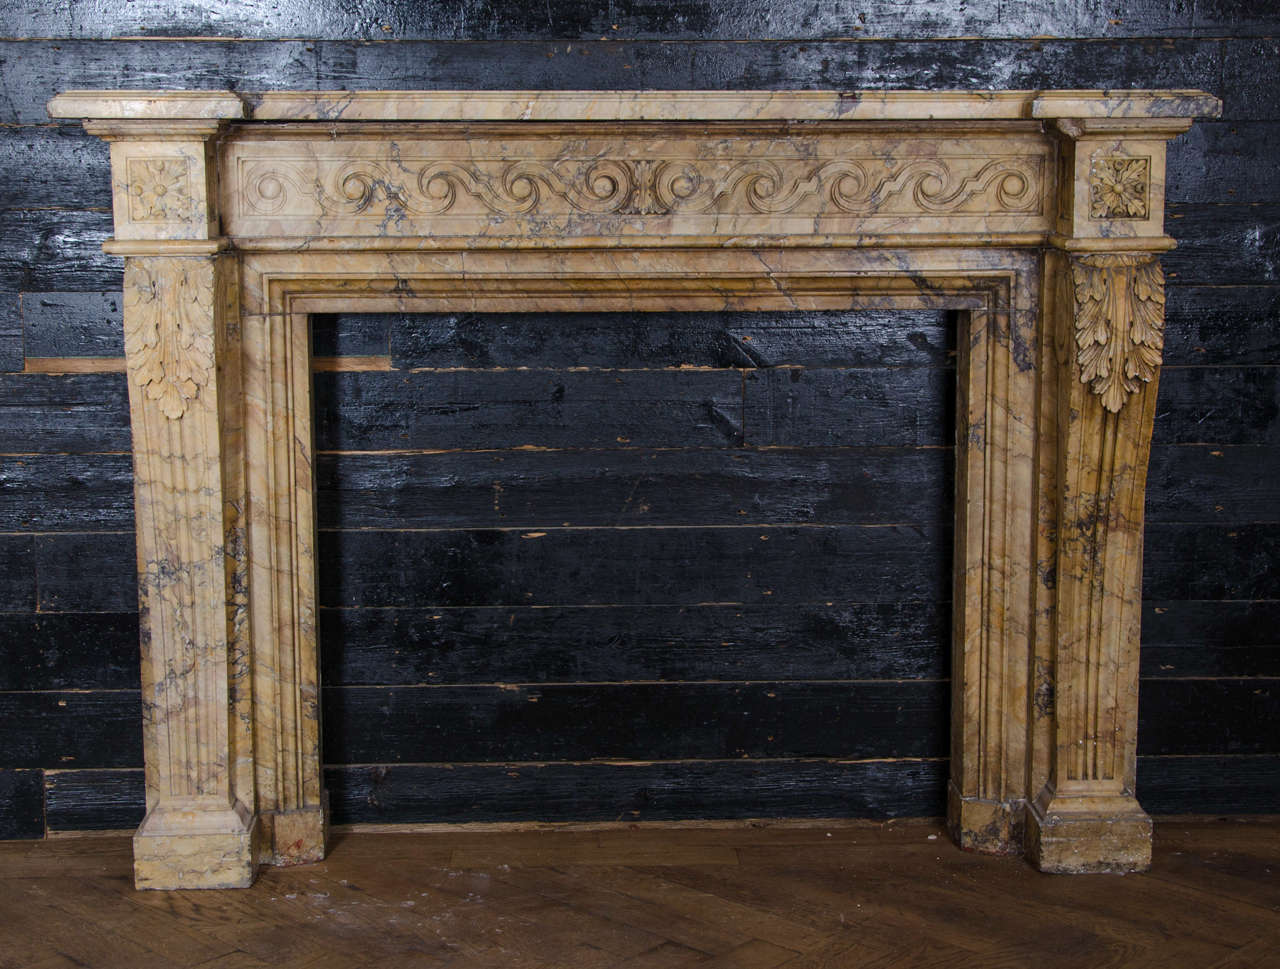 An exceptional and outstanding fire surround carved entirely from Sienna marble. This antique Louis XVI surround features a reflected vitruvian scroll running along the frieze, flanked by two pronounced endblocks decorated with a finely carved oak